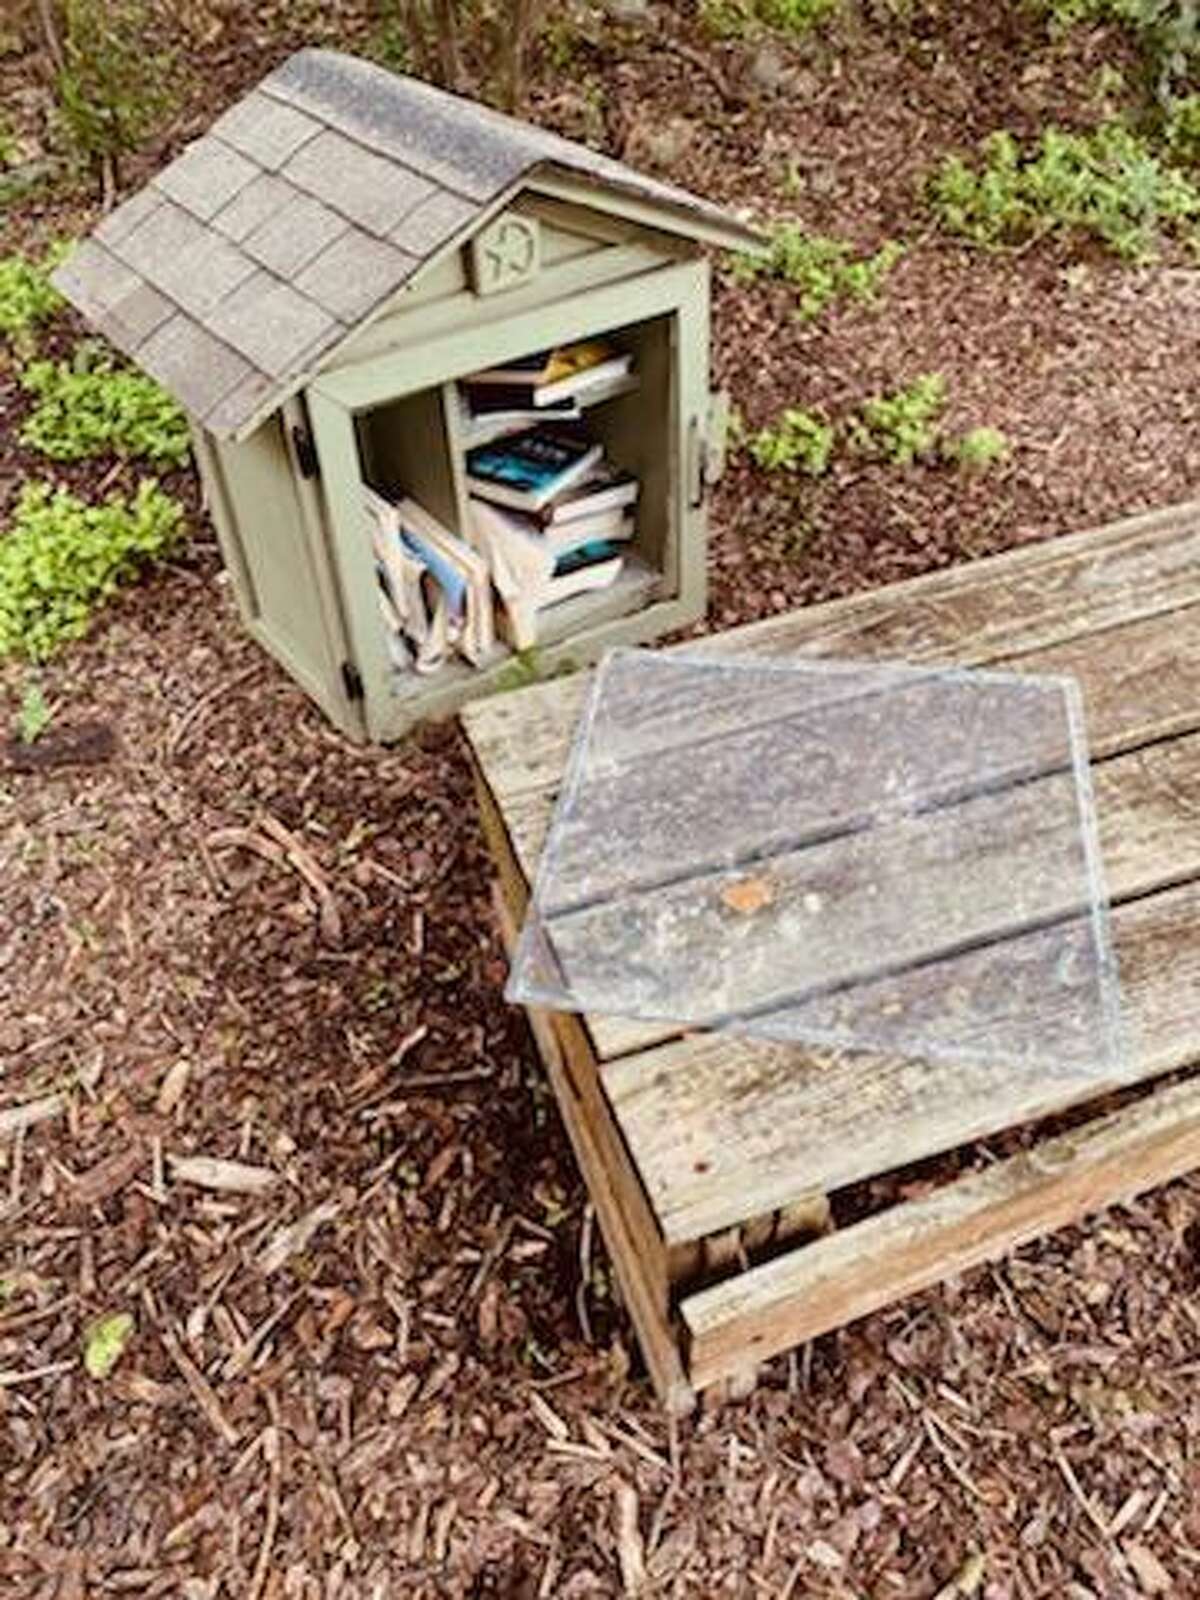 Unknown vandals attacked Alamo Heights Community Garden June 4, damaging picnic tables and the Little Free Library.